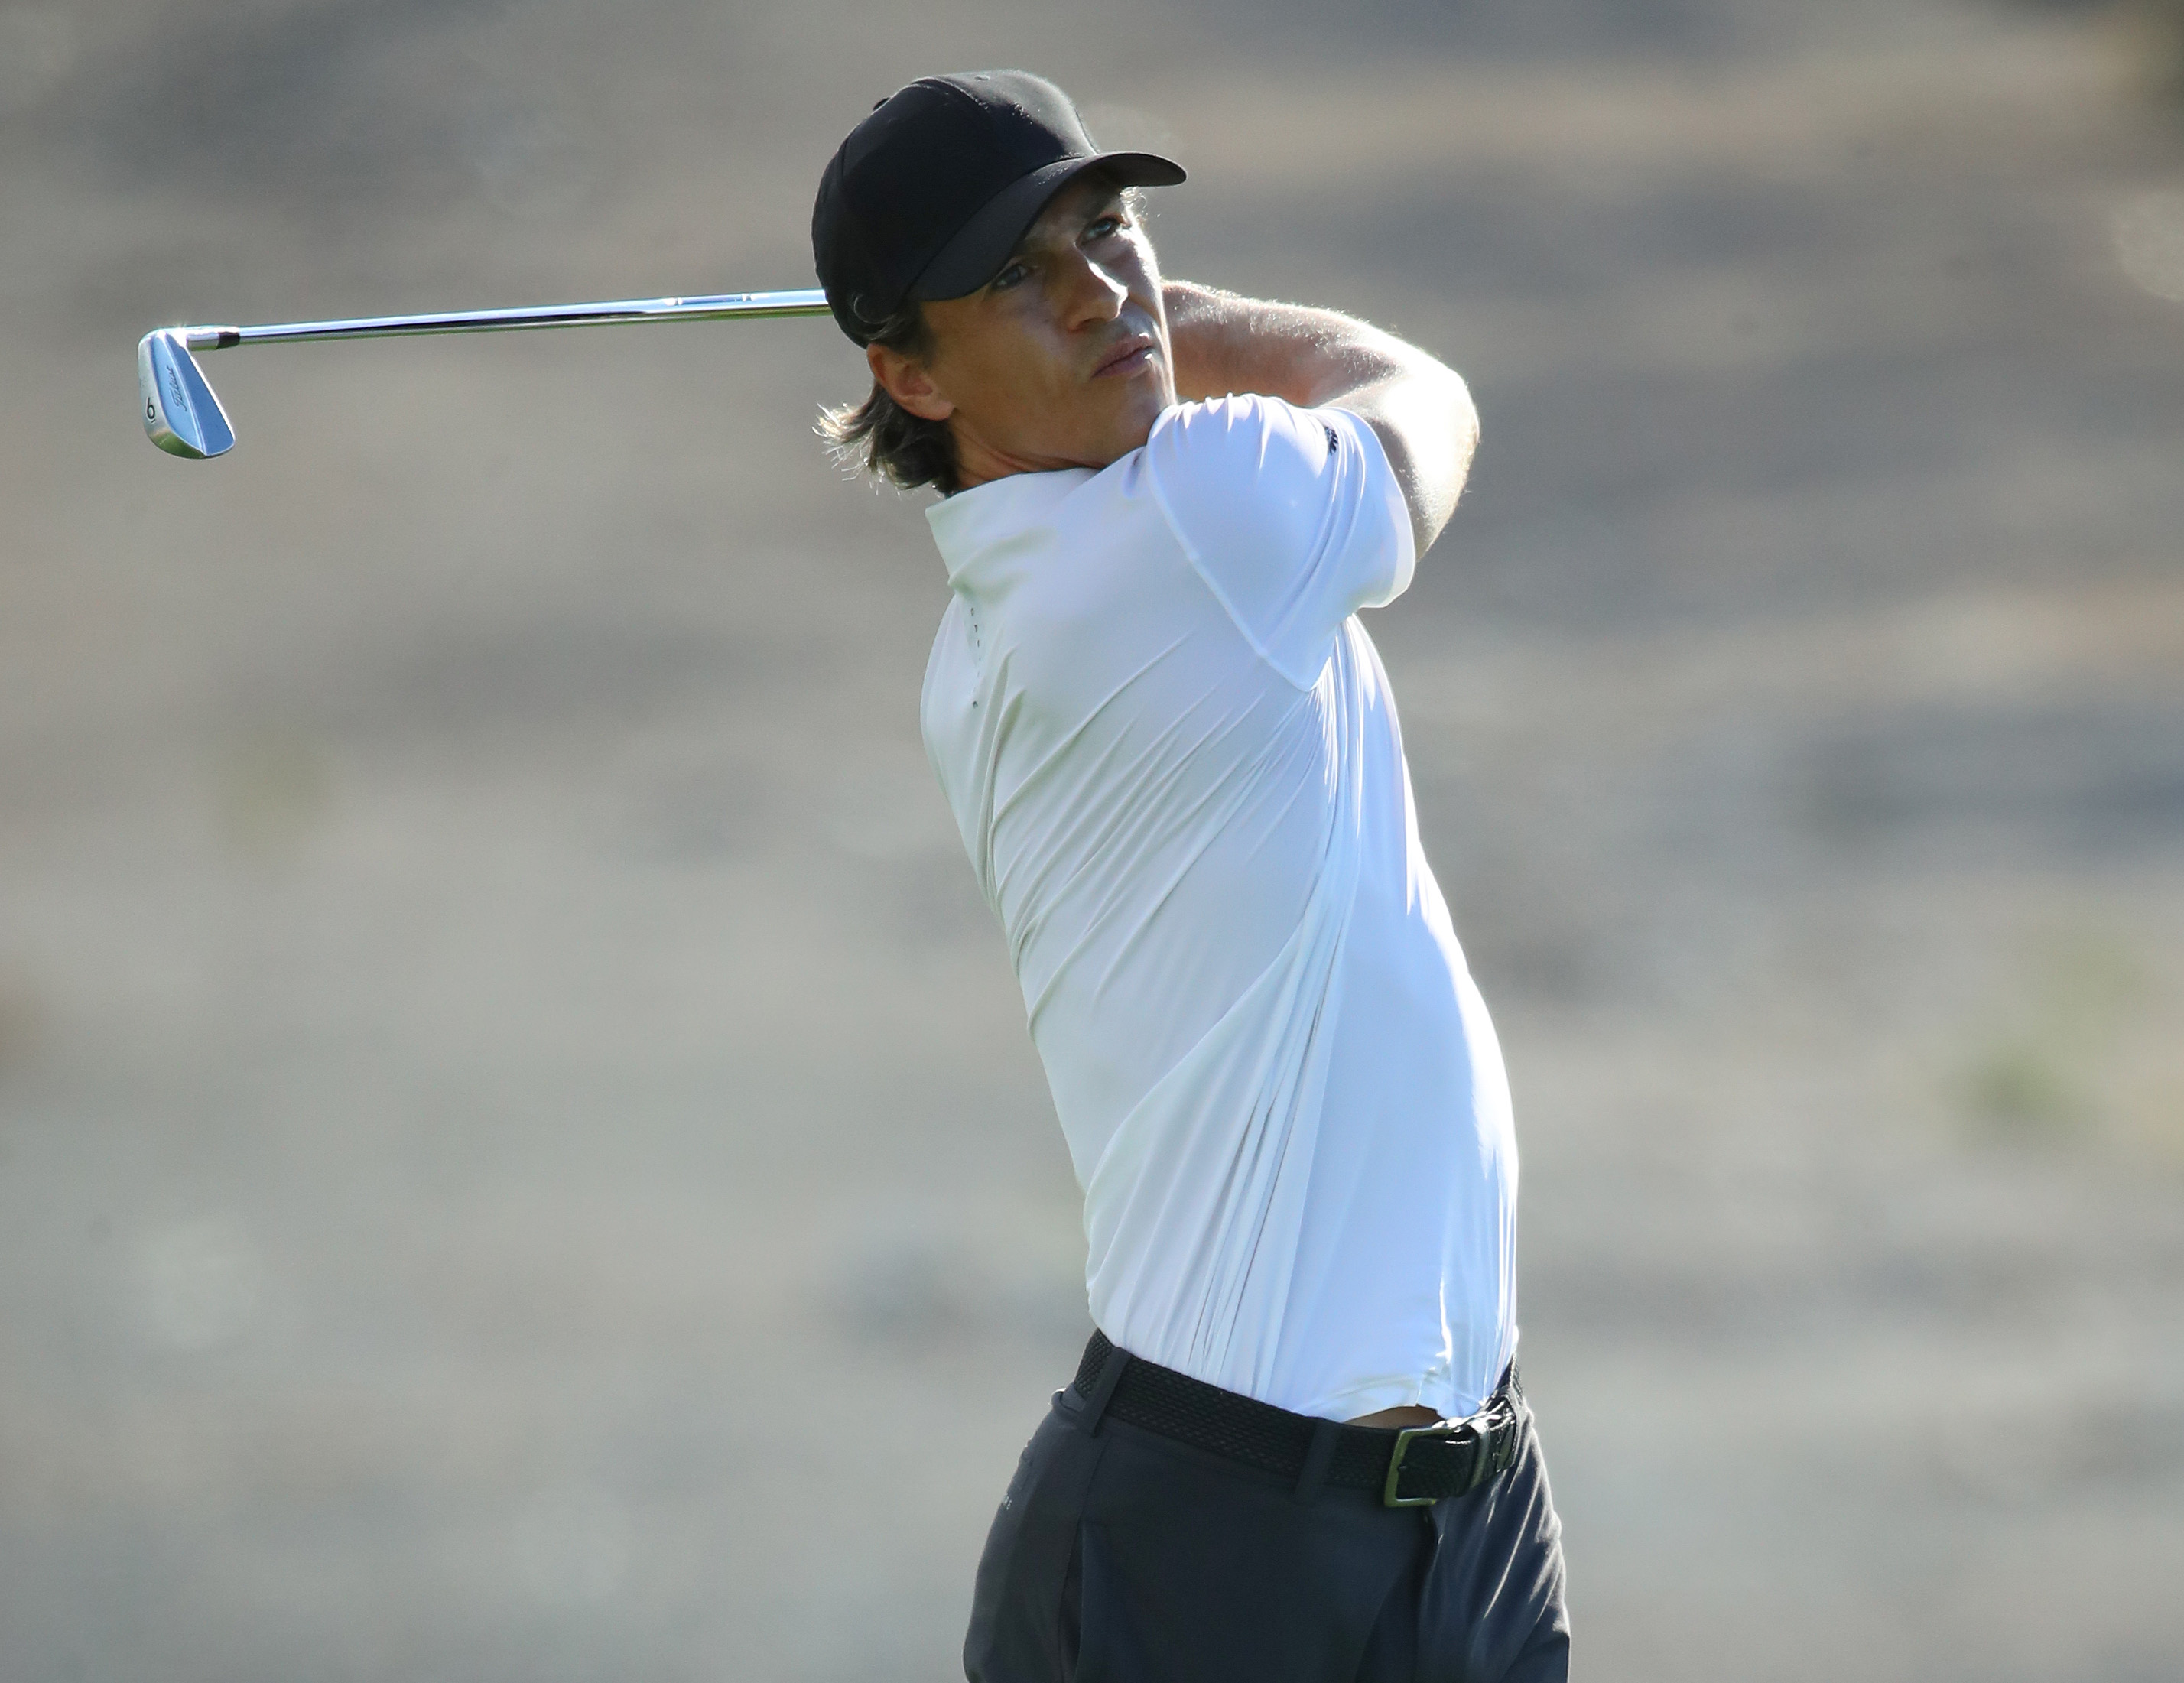 Thorbjorn Olesen, awaiting trial on sexual assault charges, leads European Tour event Golf News and Tour Information Golf Digest